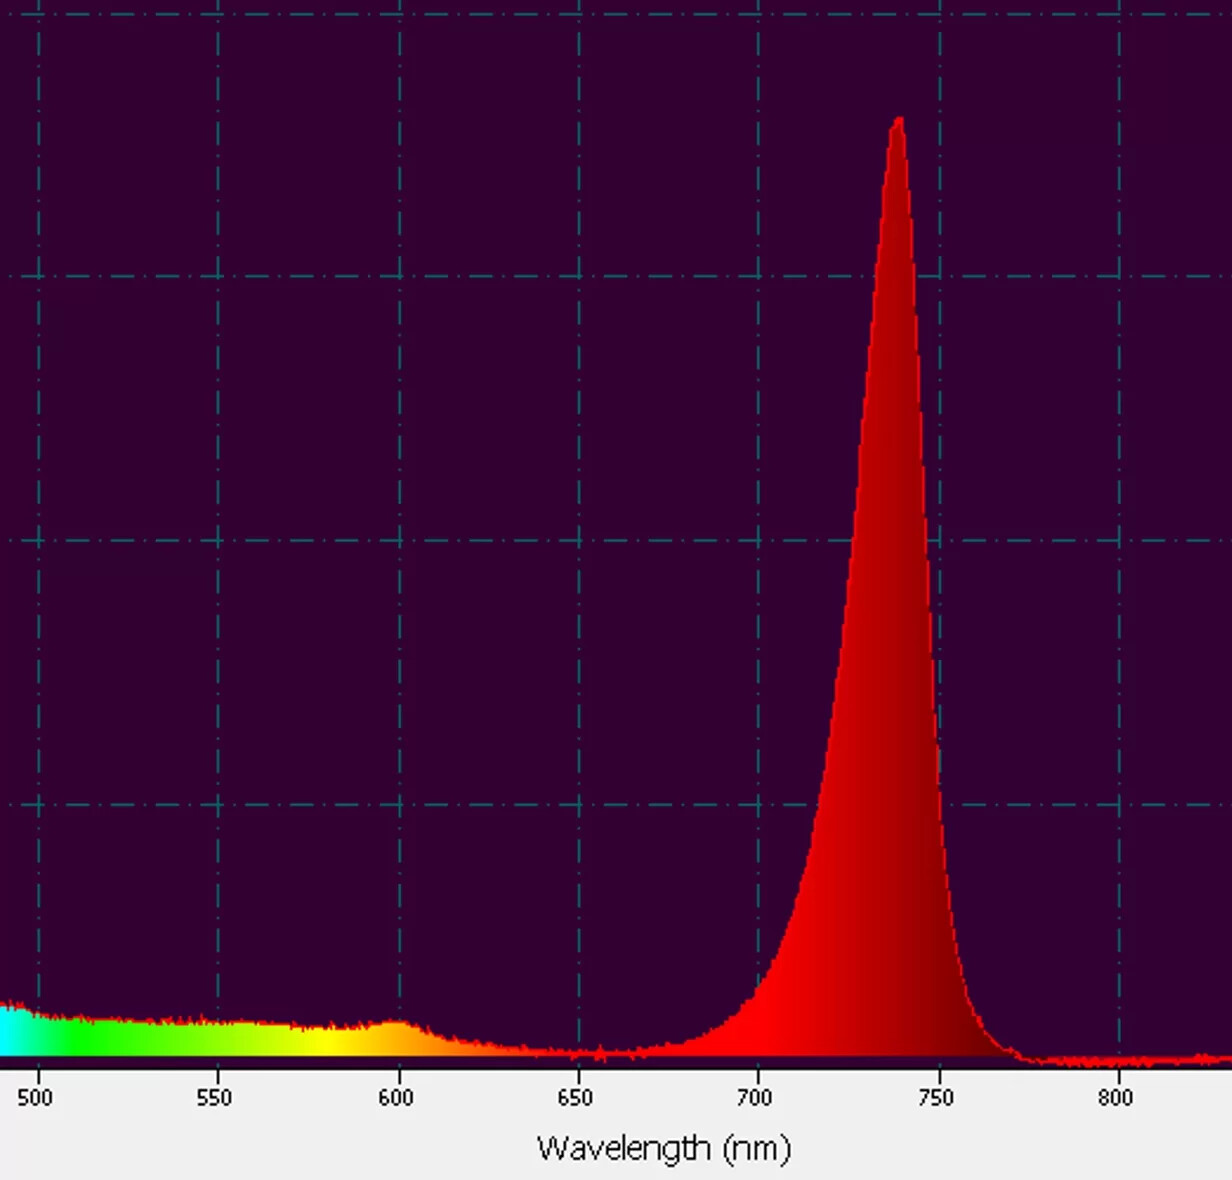  Figures 16. Spectral quality of the 730nm LED